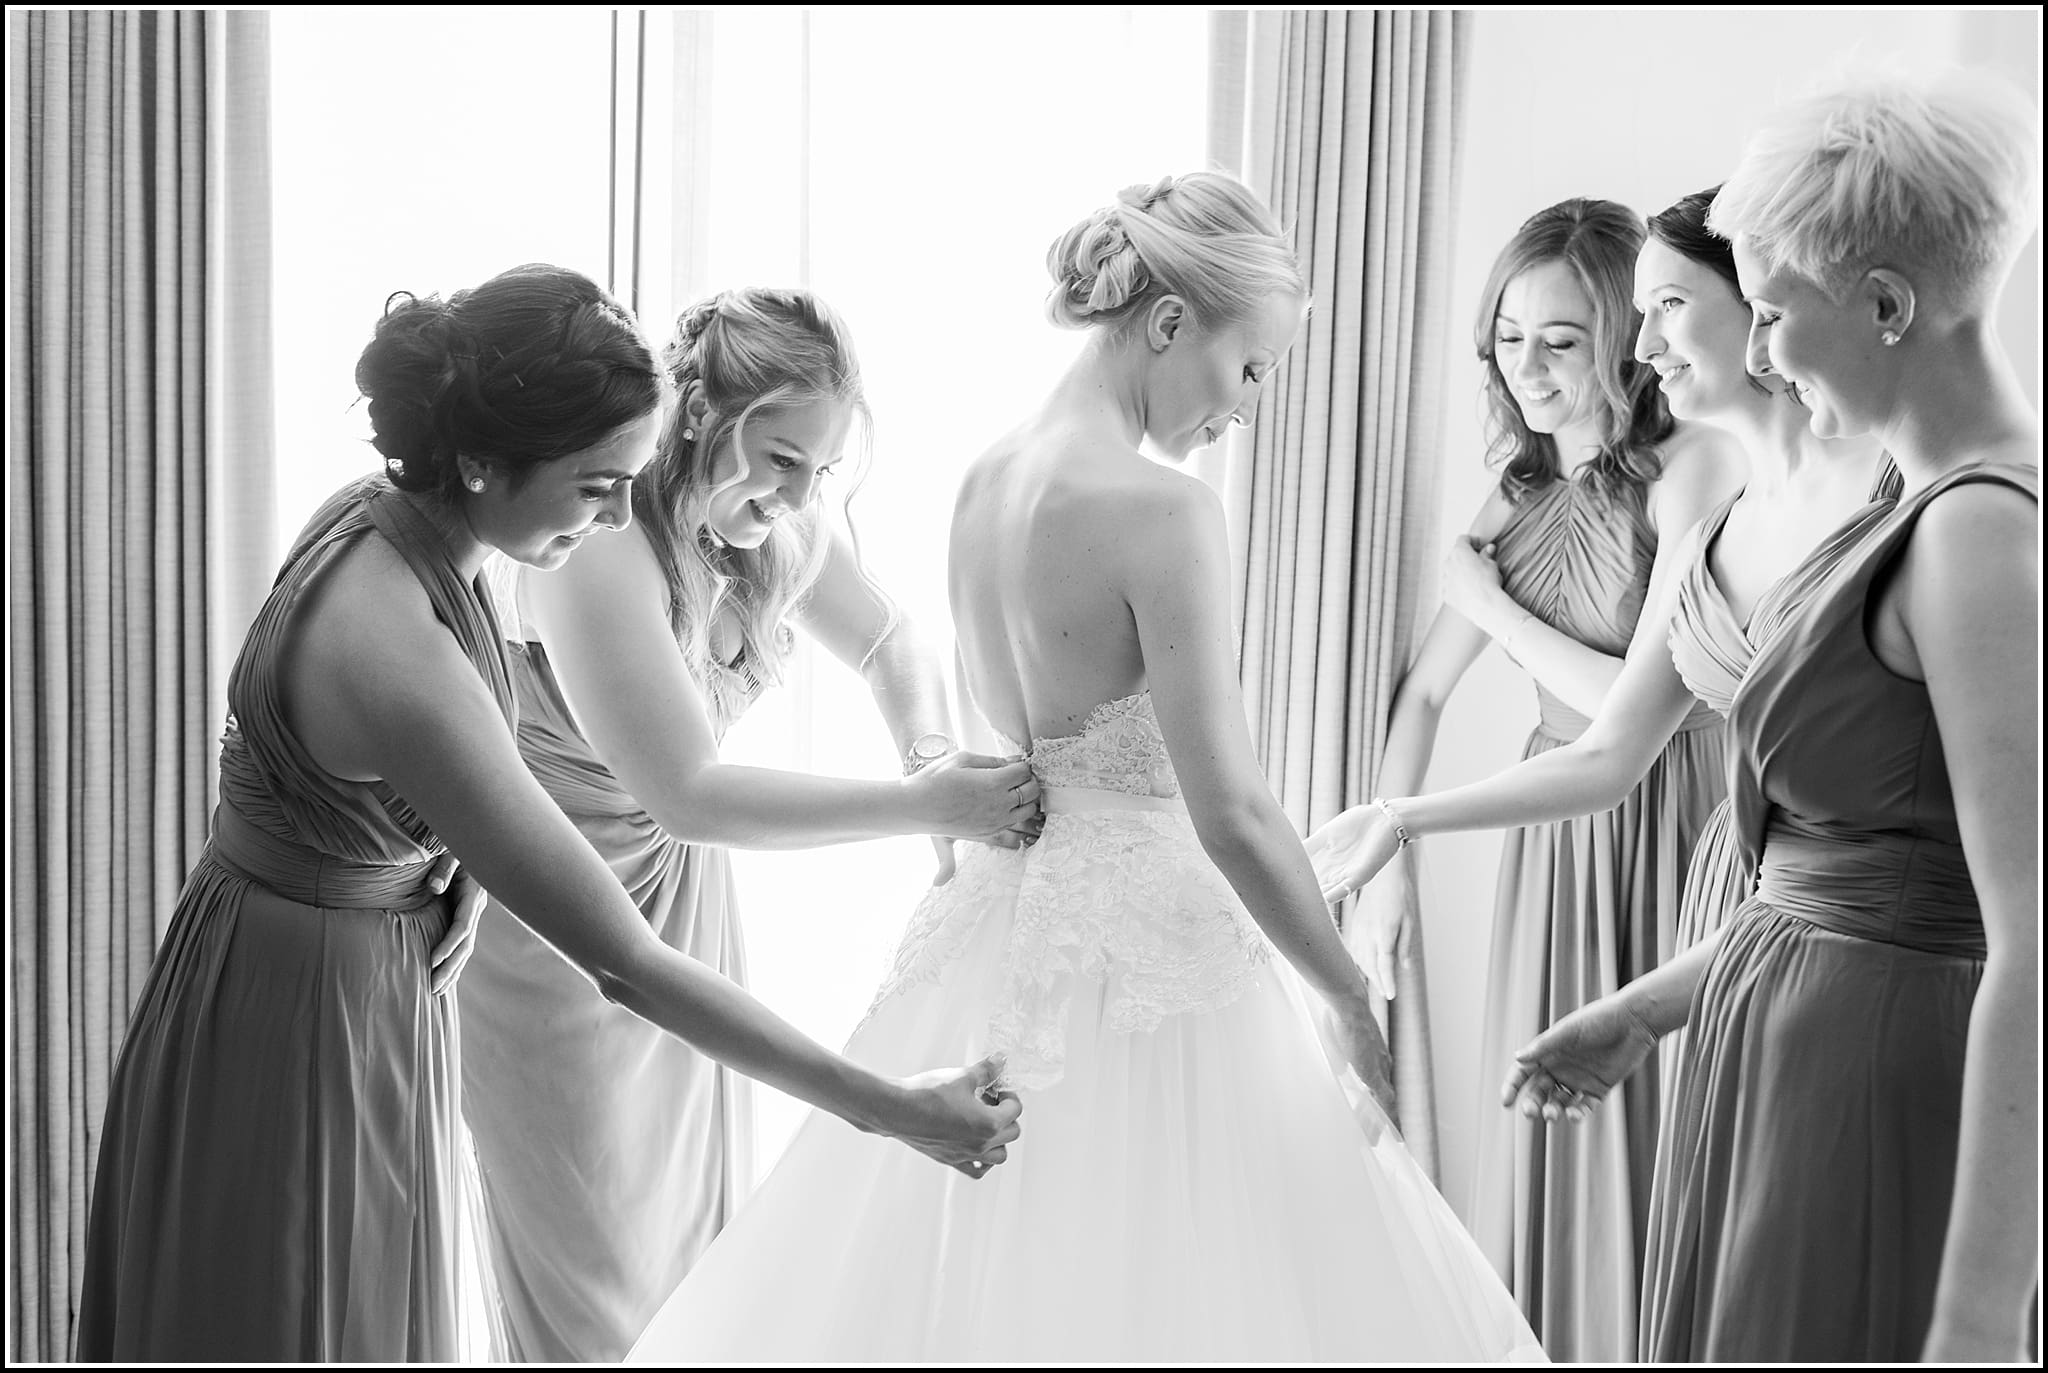  favorite wedding images 2016, wedding photos from 2016, our favorite wedding photos, black and white bridal portrait, bridal party getting ready photo